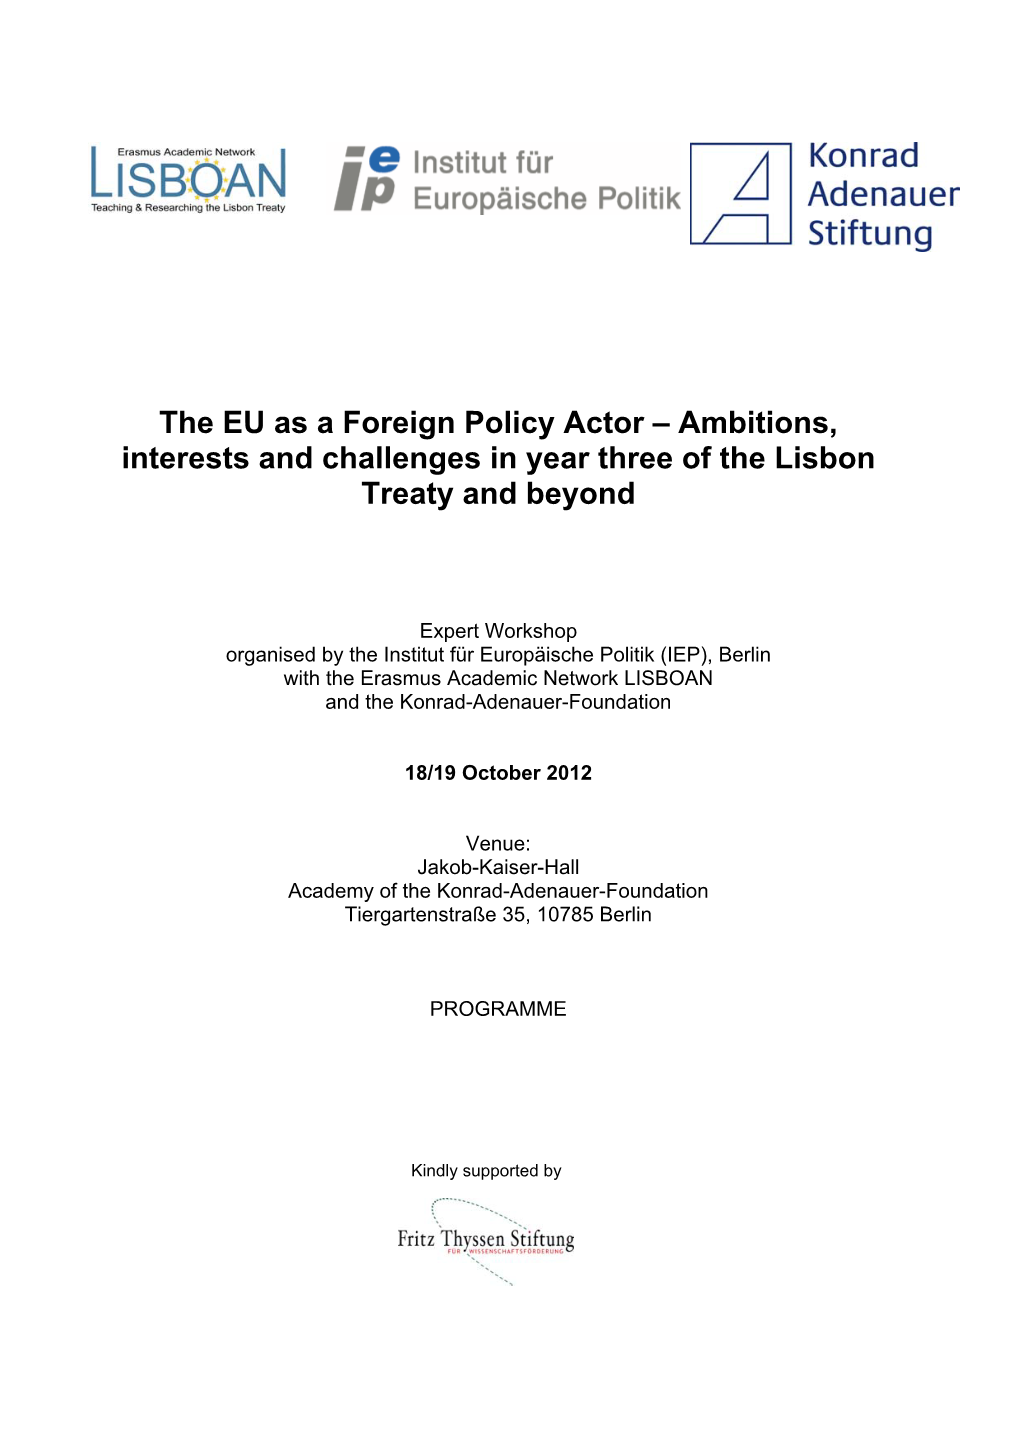 The EU As a Foreign Policy Actor – Ambitions, Interests and Challenges in Year Three of the Lisbon Treaty and Beyond